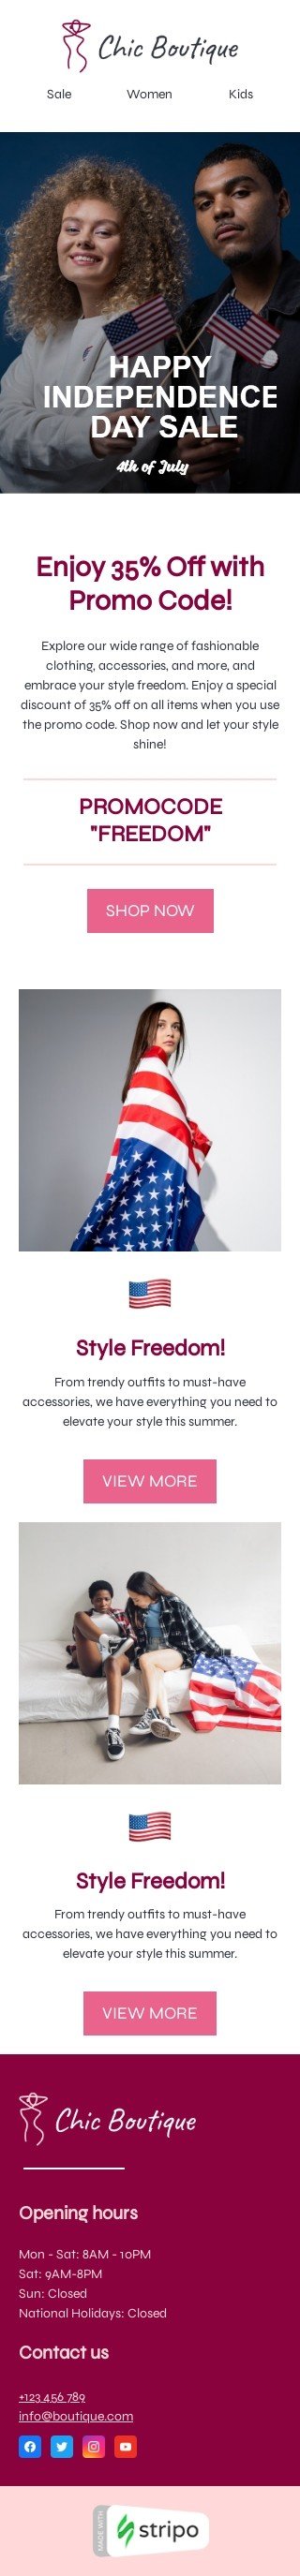 Independence Day email template "Style freedom" for fashion industry mobile view